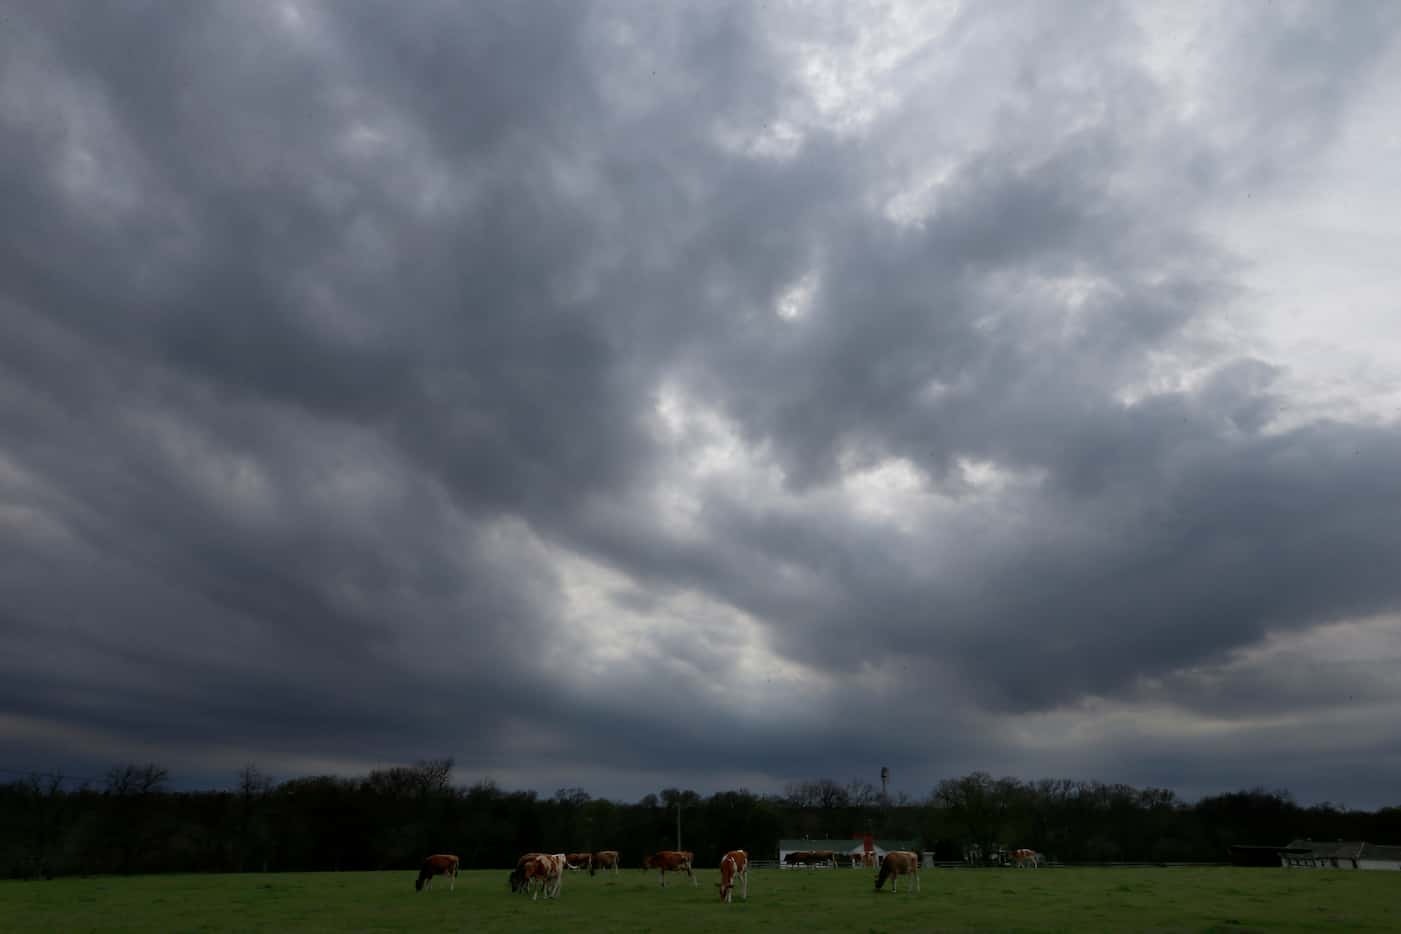 Dark clouds are seen above Lavon Farms on N. Jupiter Rd. in Plano, on Saturday, March 11, 2017.